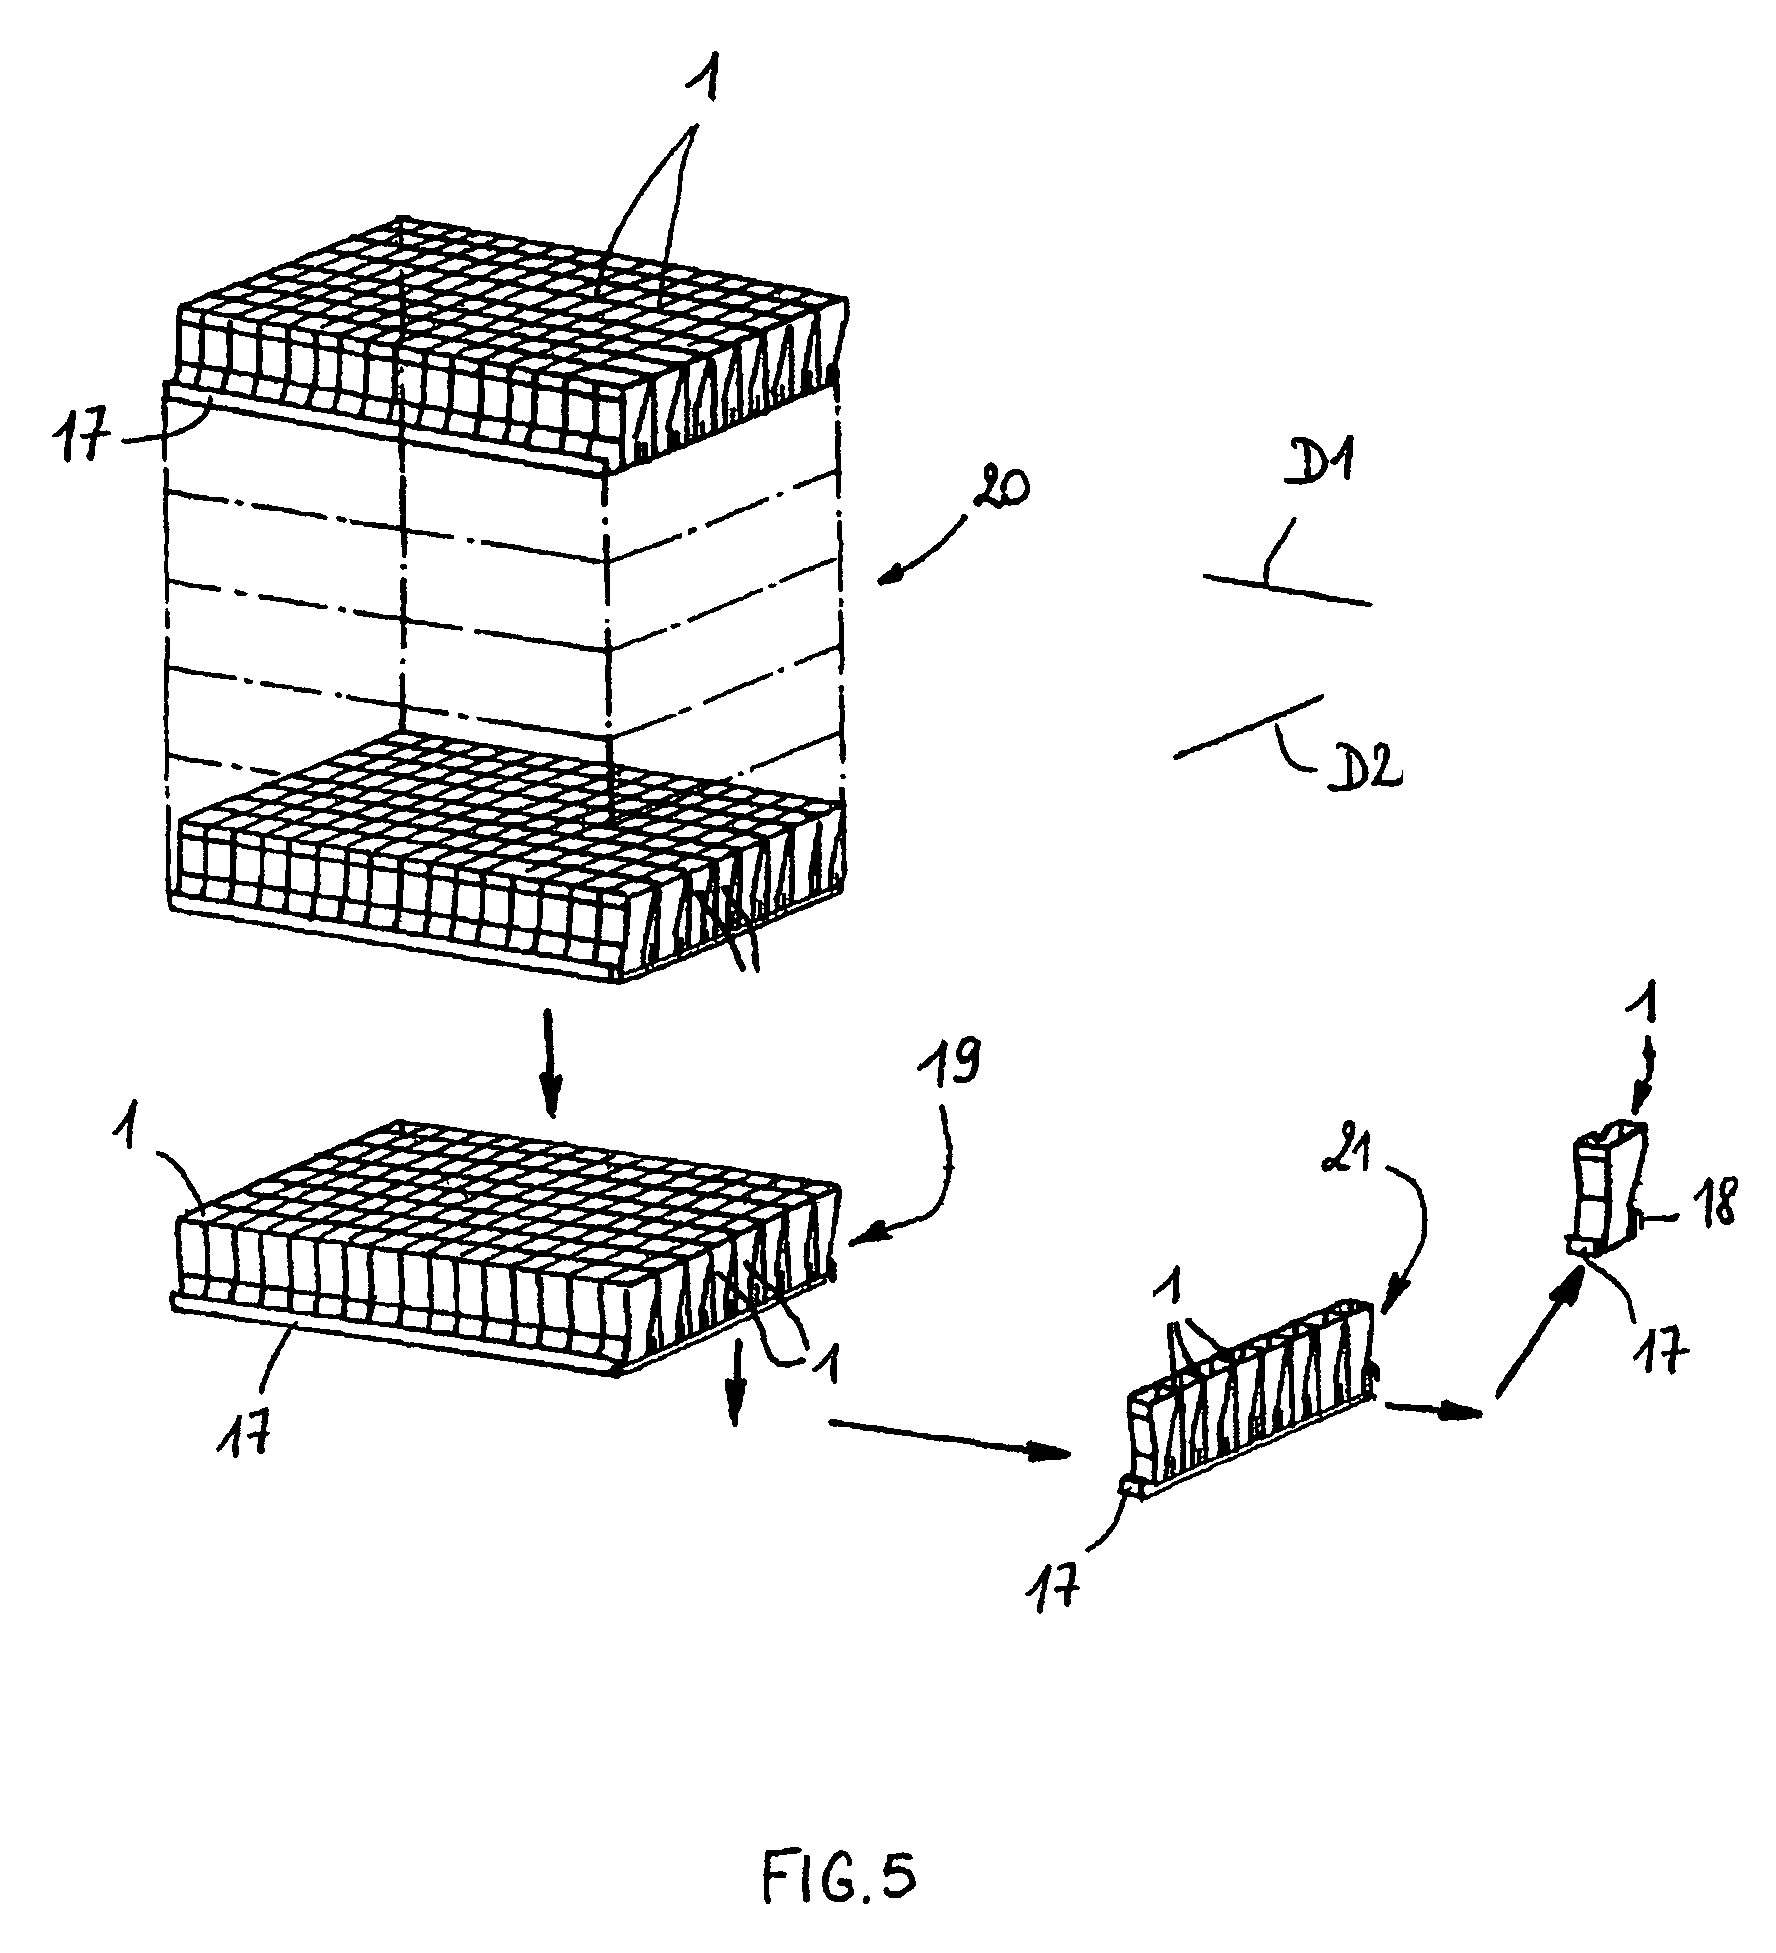 Unit cuvette for analyzing a biological fluid, automatic device for in vitro analysis